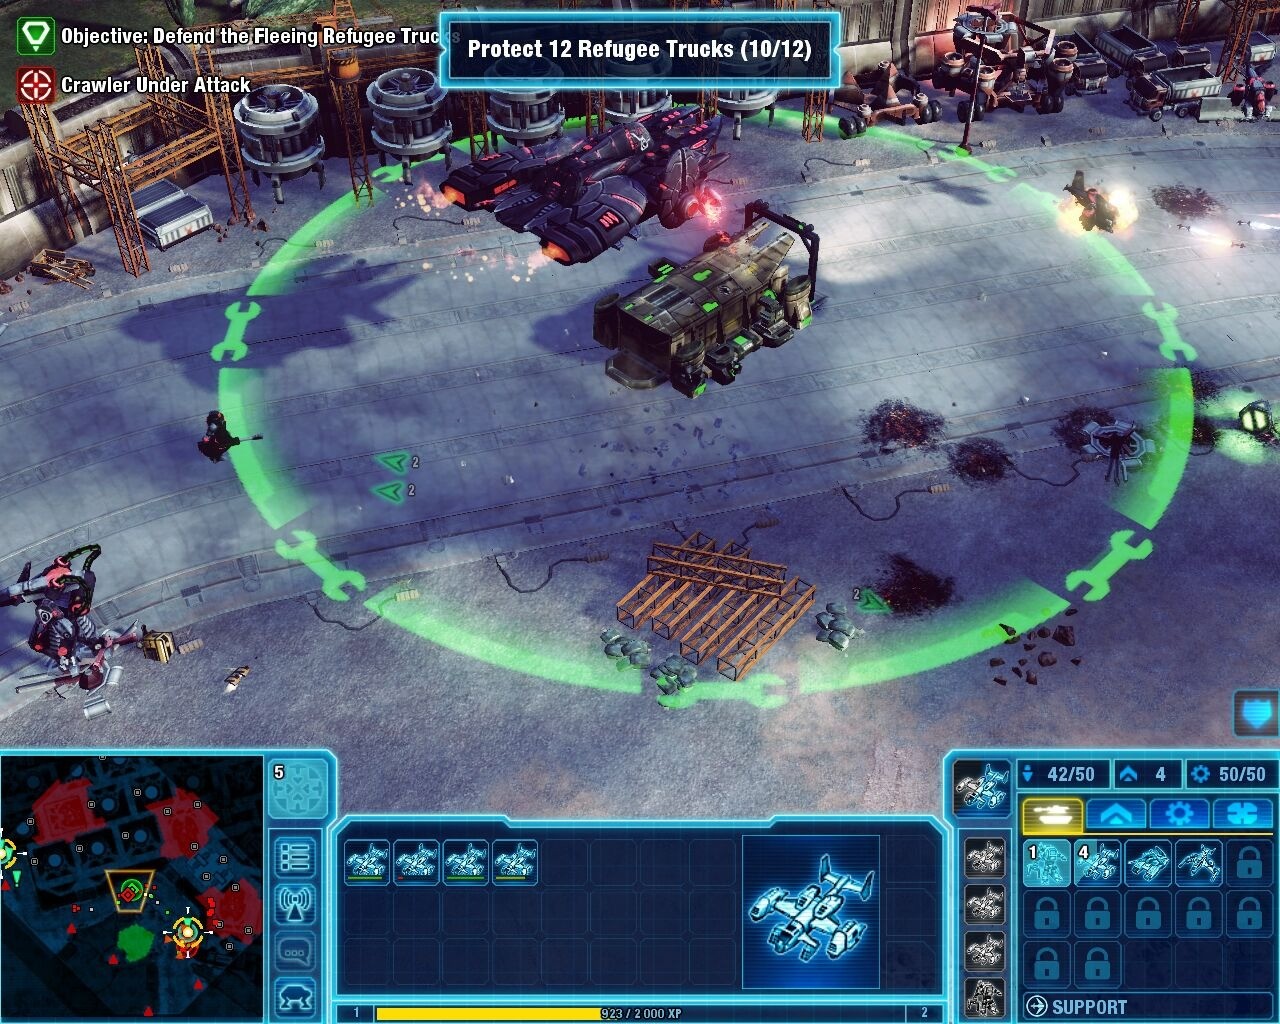 Command & Conquer: The Ultimate Collection